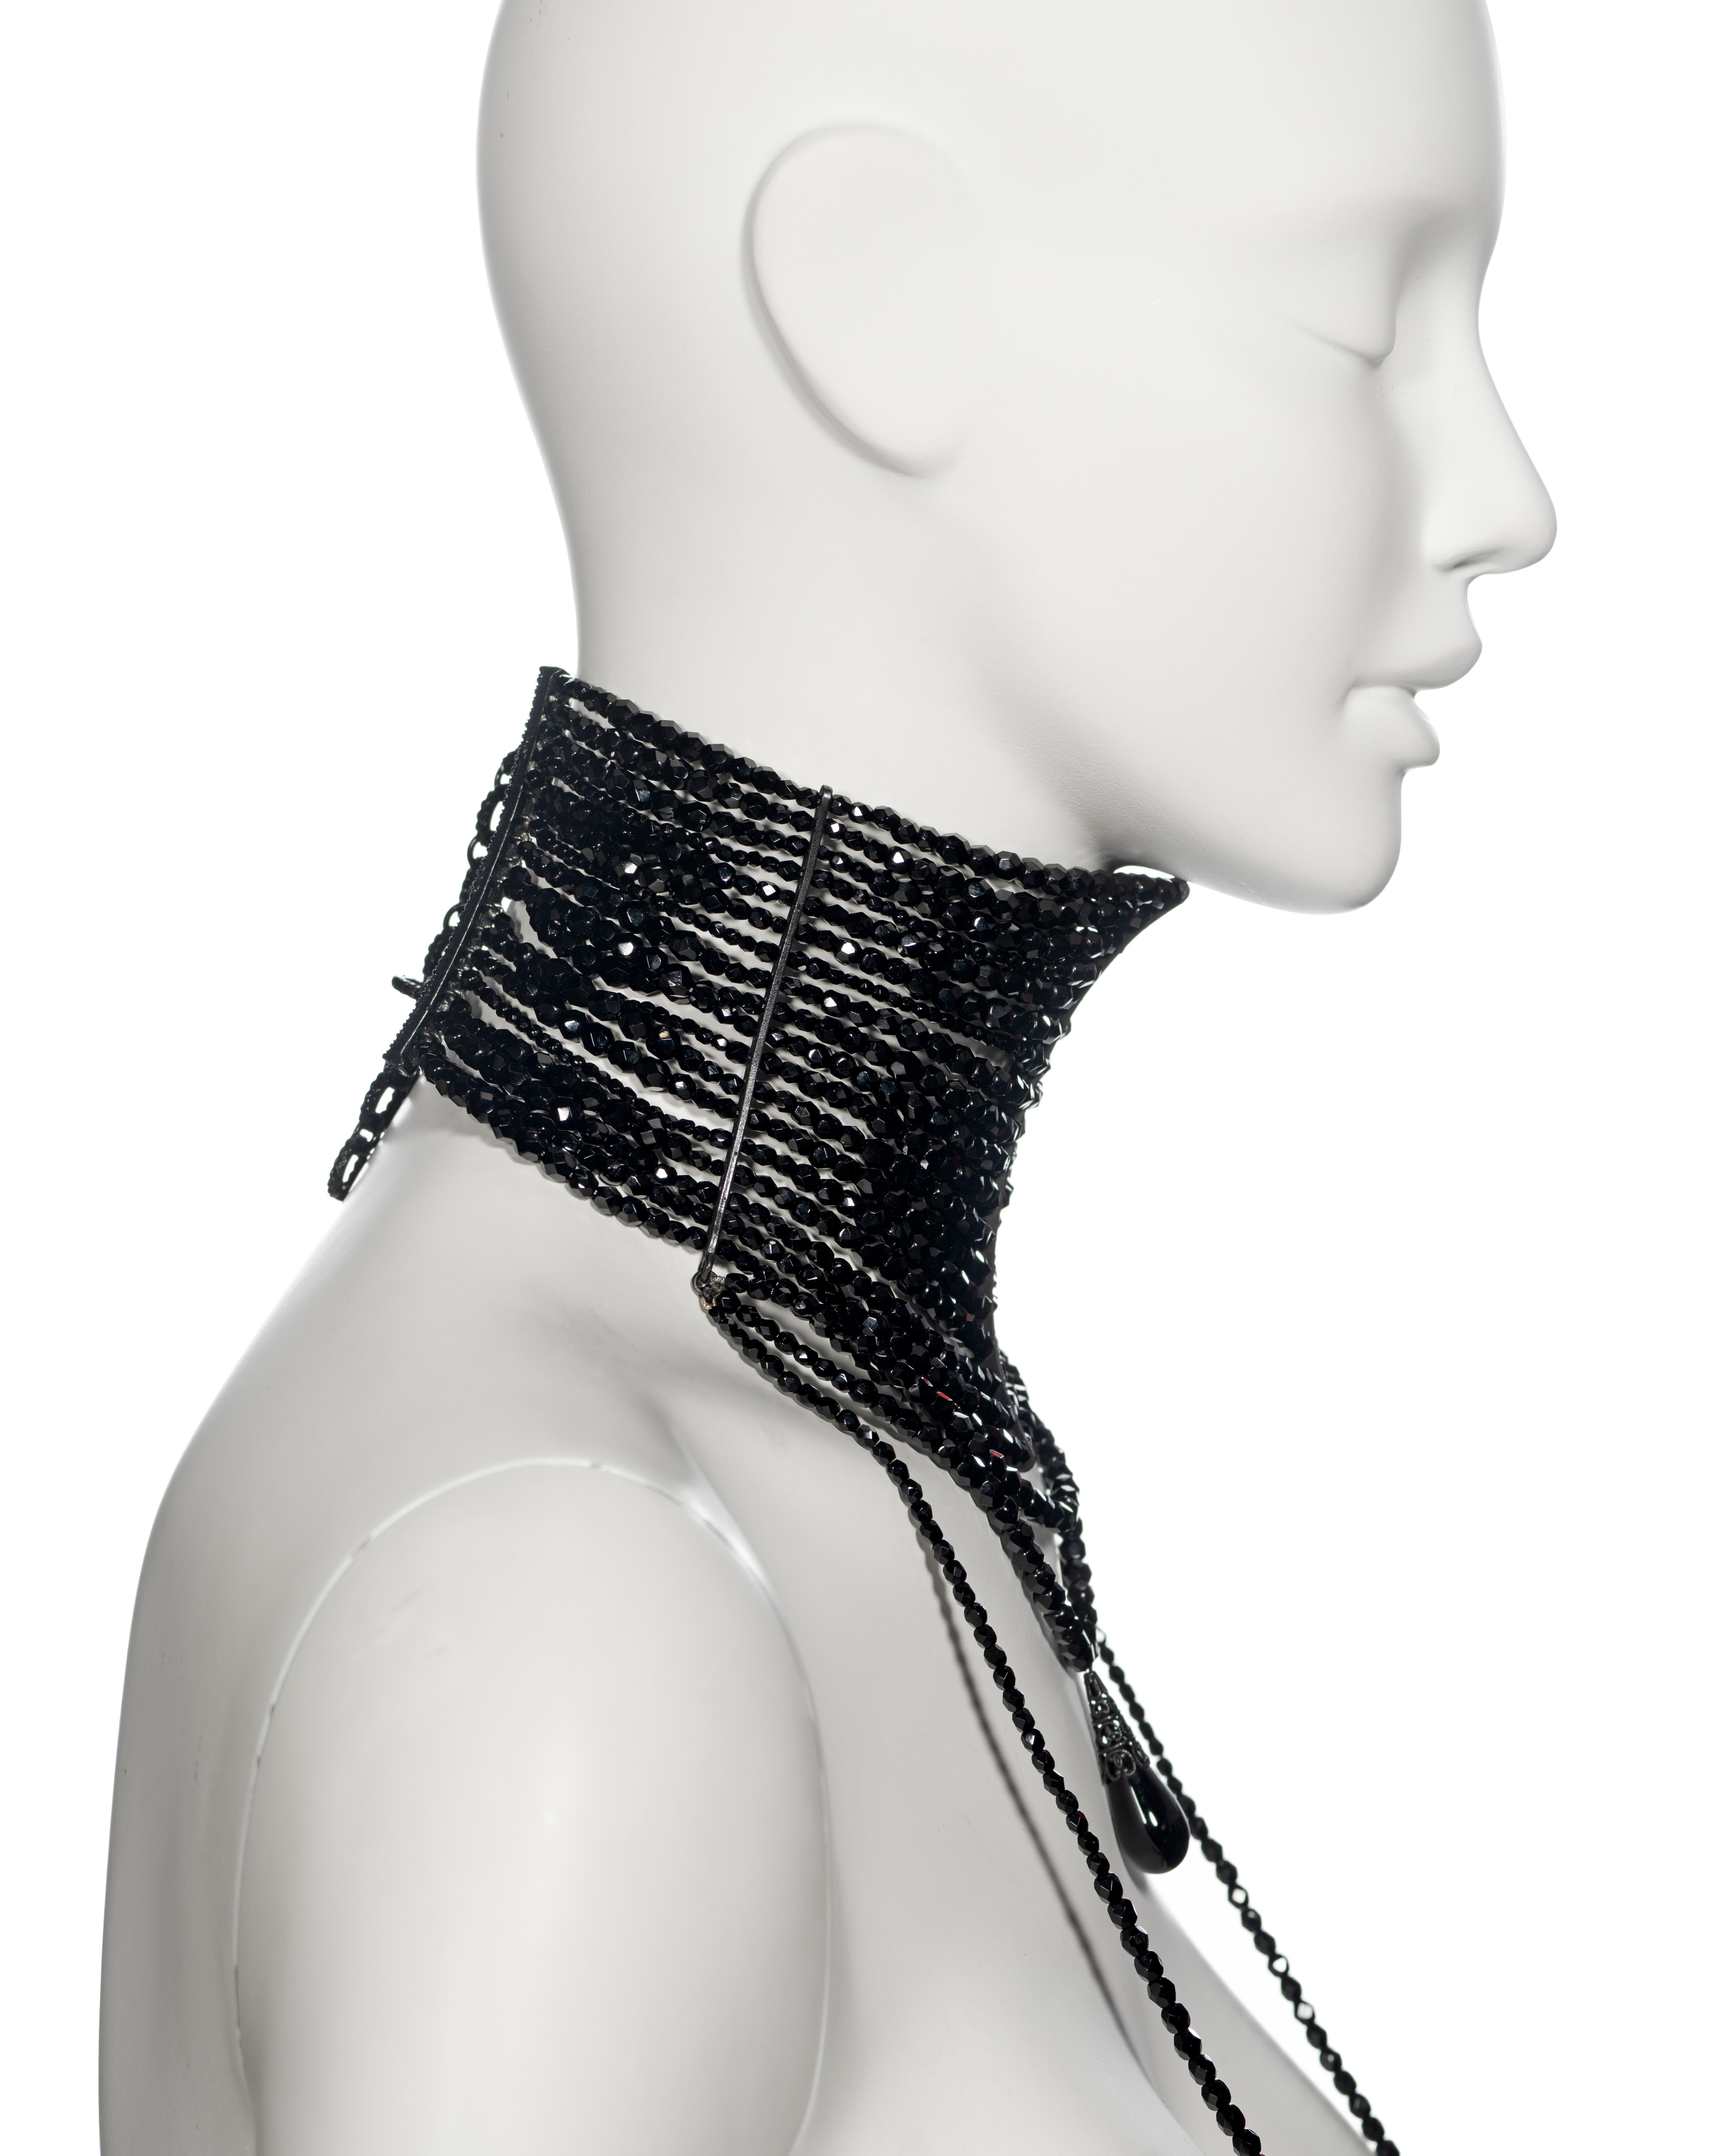 Christian Dior by John Galliano black beaded Masai choker necklace, ss 1999 For Sale 7